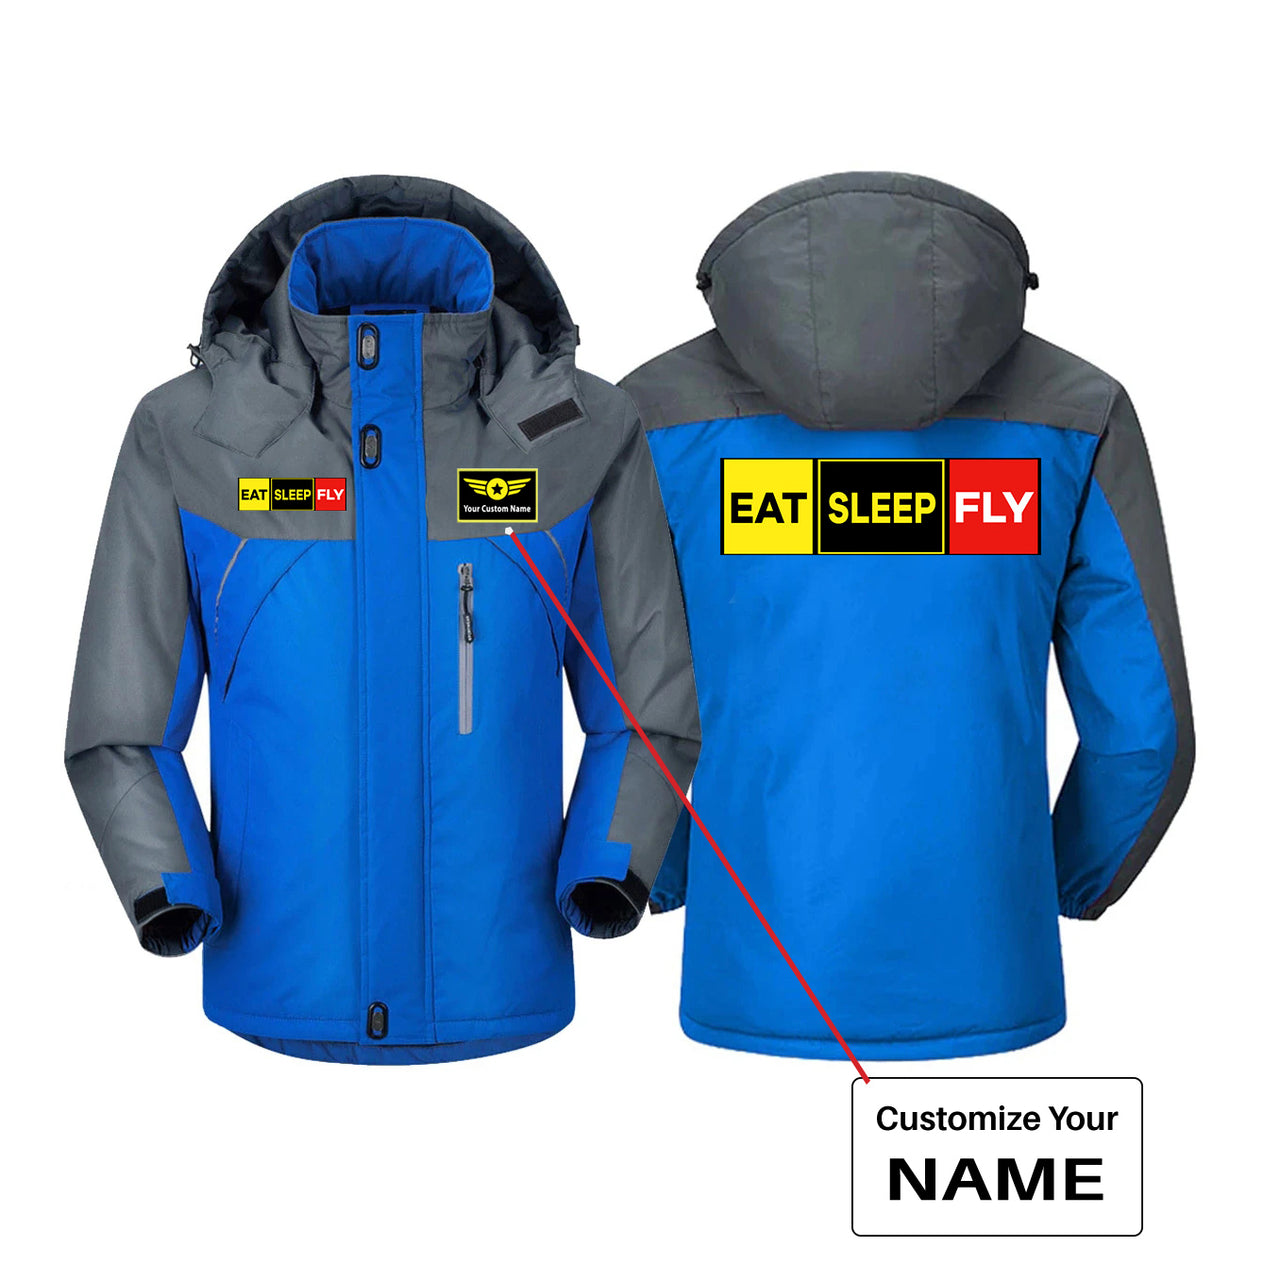 Eat Sleep Fly (Colourful) Designed Thick Winter Jackets